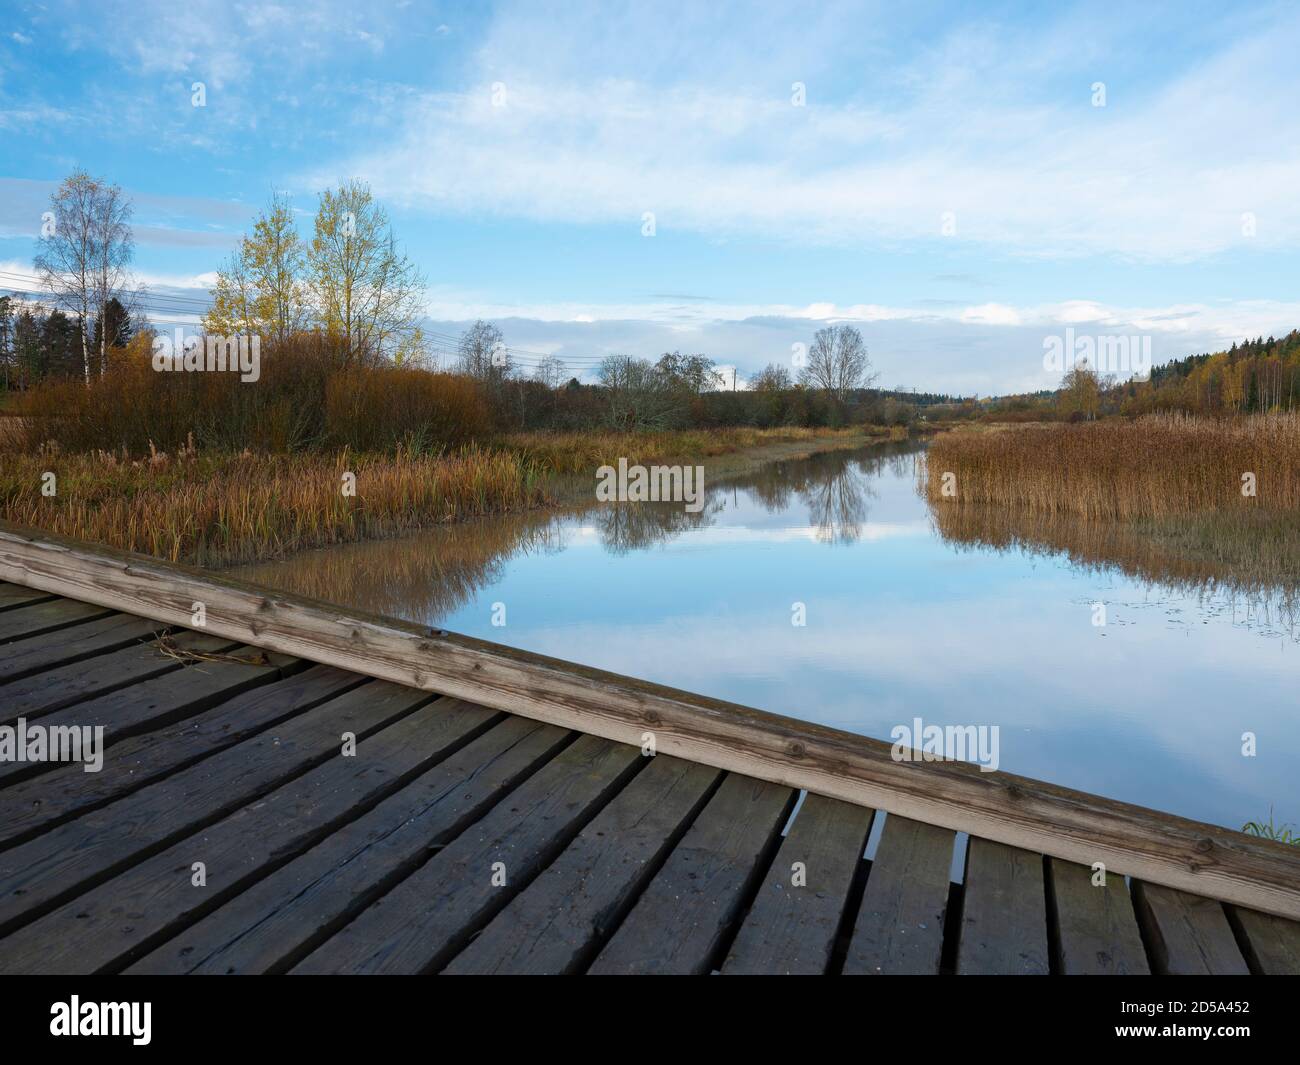 Sipoo/Finland - OCTOBER 12, 2020: A beautiful rural scene casting reflections on the calm river surface. Stock Photo